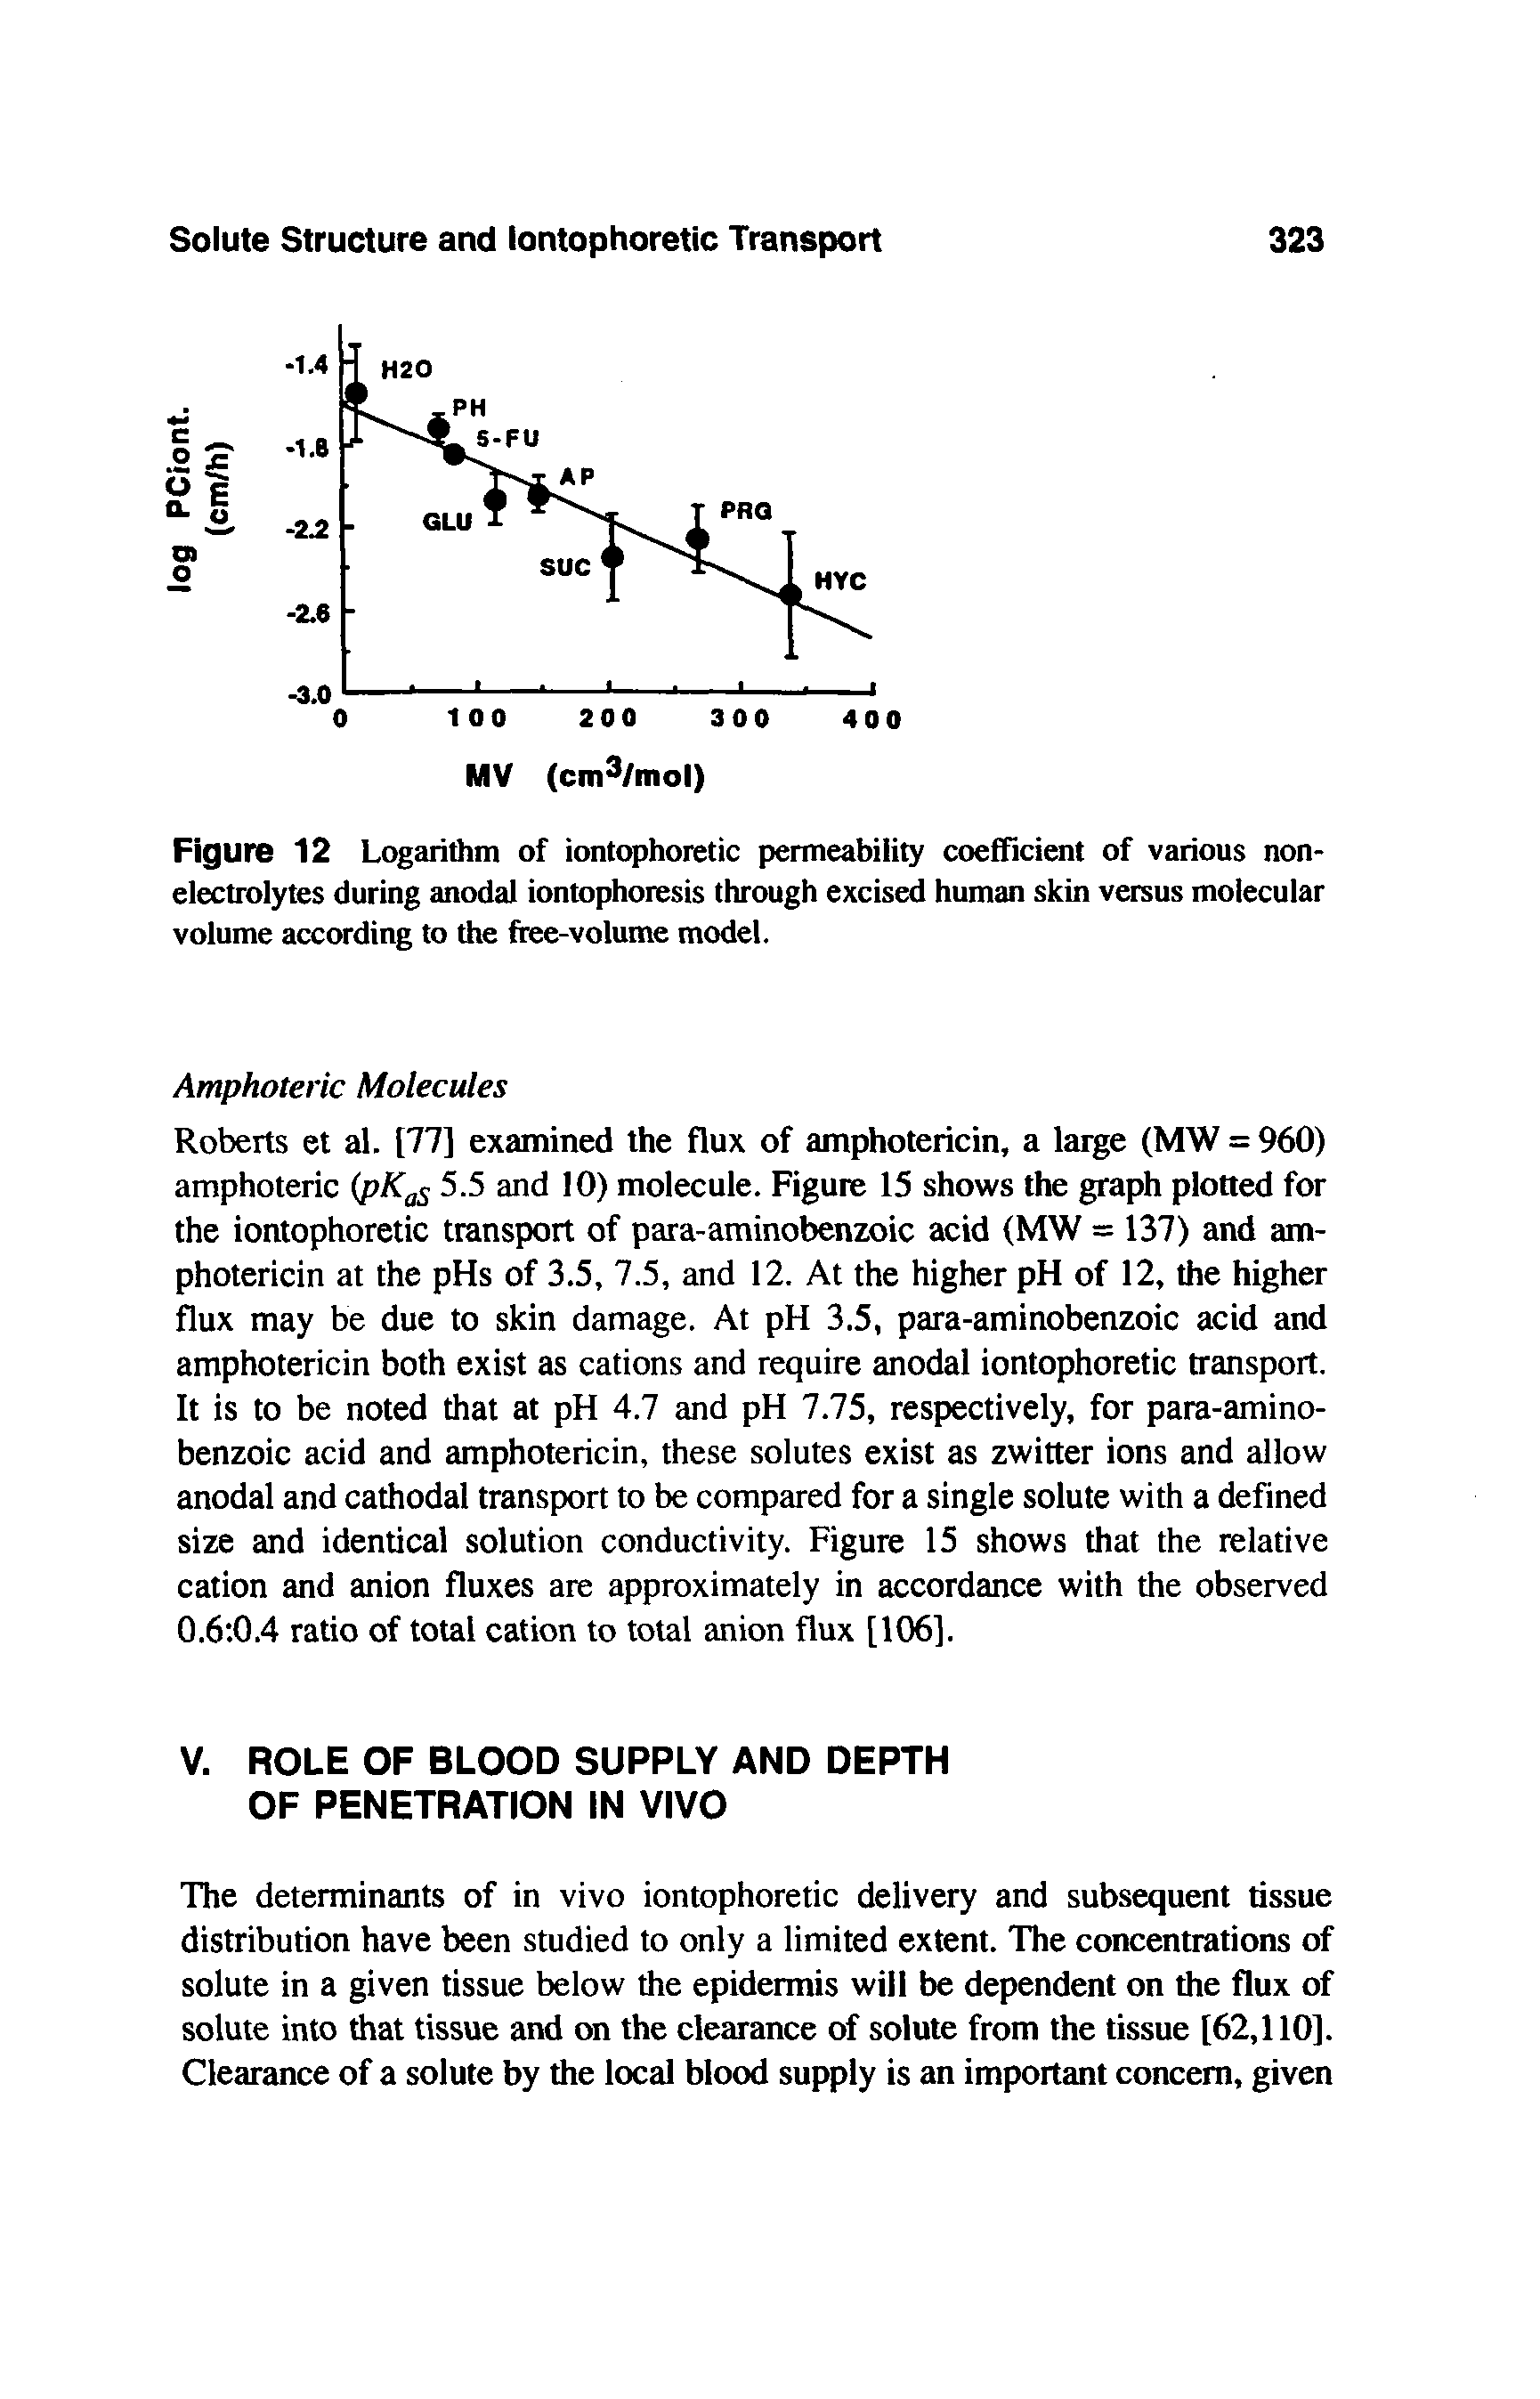 Figure 12 Logarithm of iontophoretic permeability coefficient of various nonelectrolytes during anodal iontophoresis through excised human skin versus molecular volume according to the ftee-volume model.